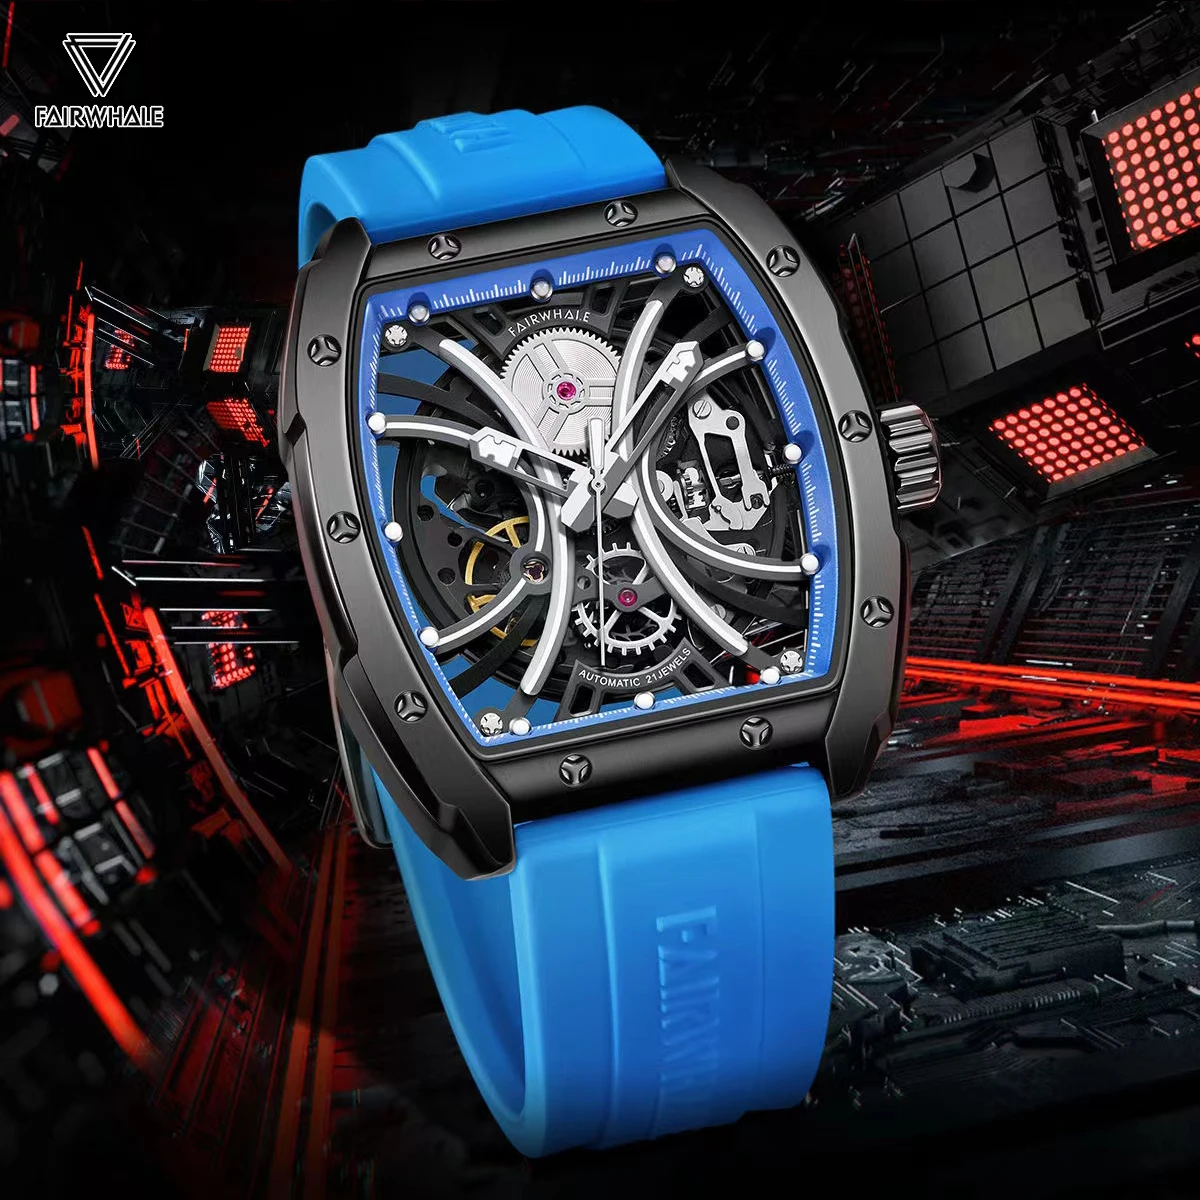 Men's Watches Auto Mechanical Wristwatch For Men Stainless Steel Case Automatic Man Mark Fairwhale Watch Waterproof Blue Red